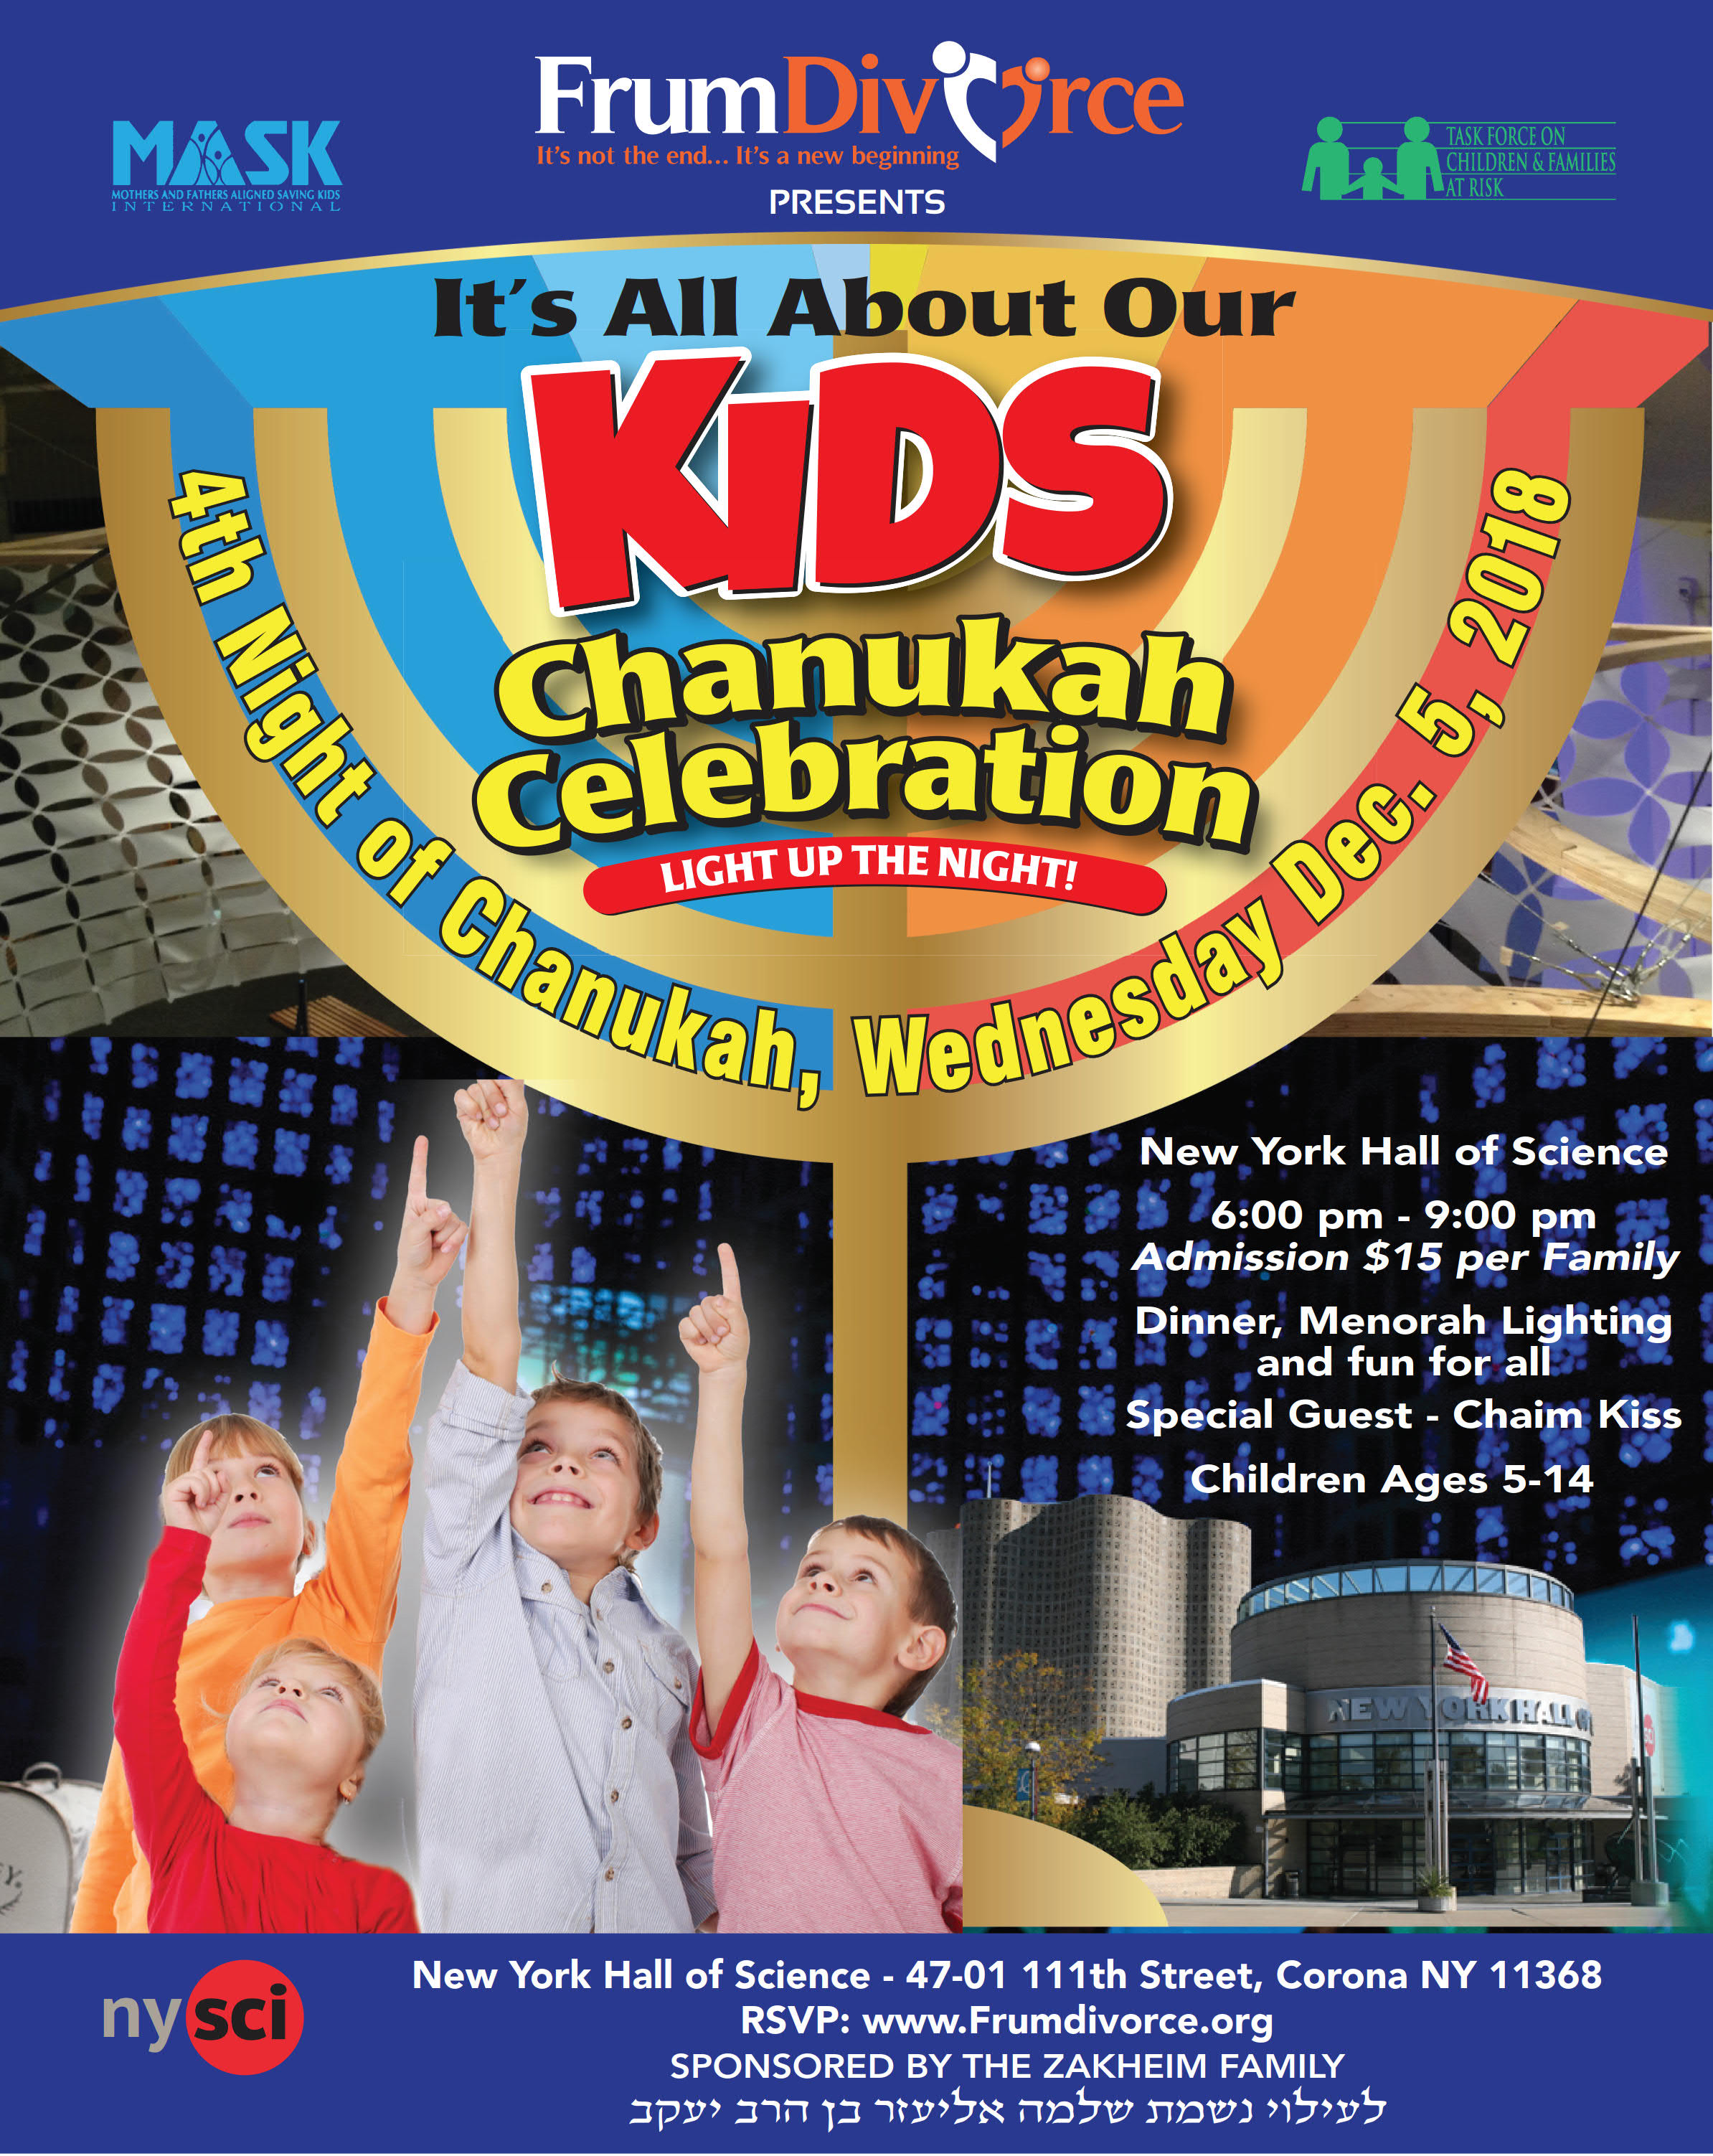 Chanukah Celebration: It's All About Our Kids!